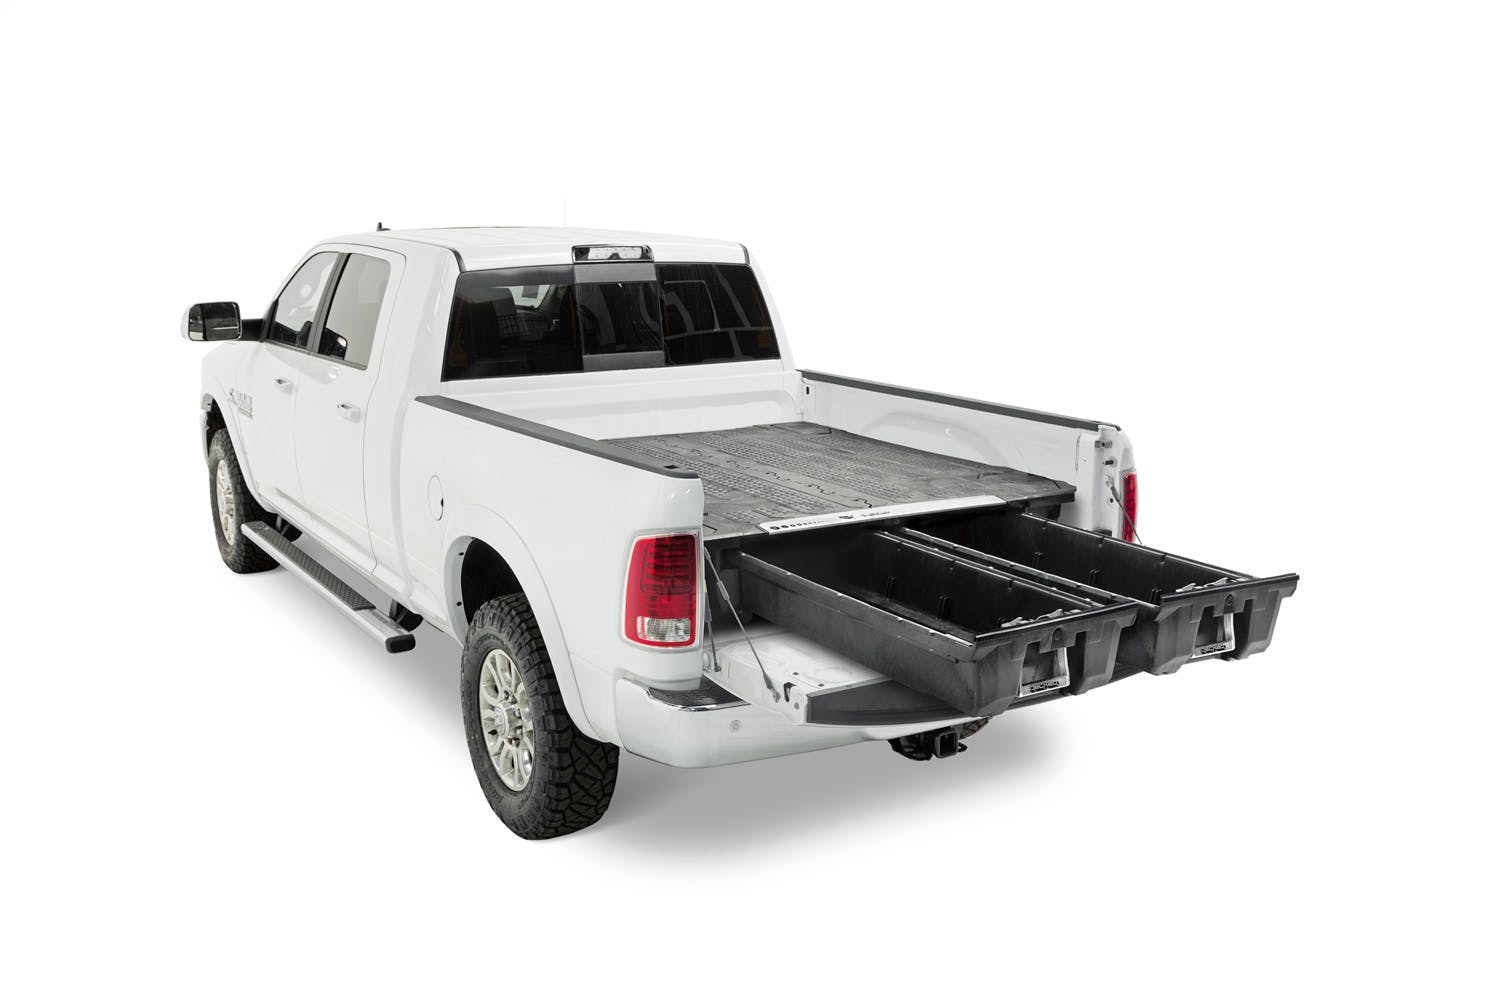 DECKED DR2 75.25 Two Drawer Storage System for A Full Size Pick Up Truck